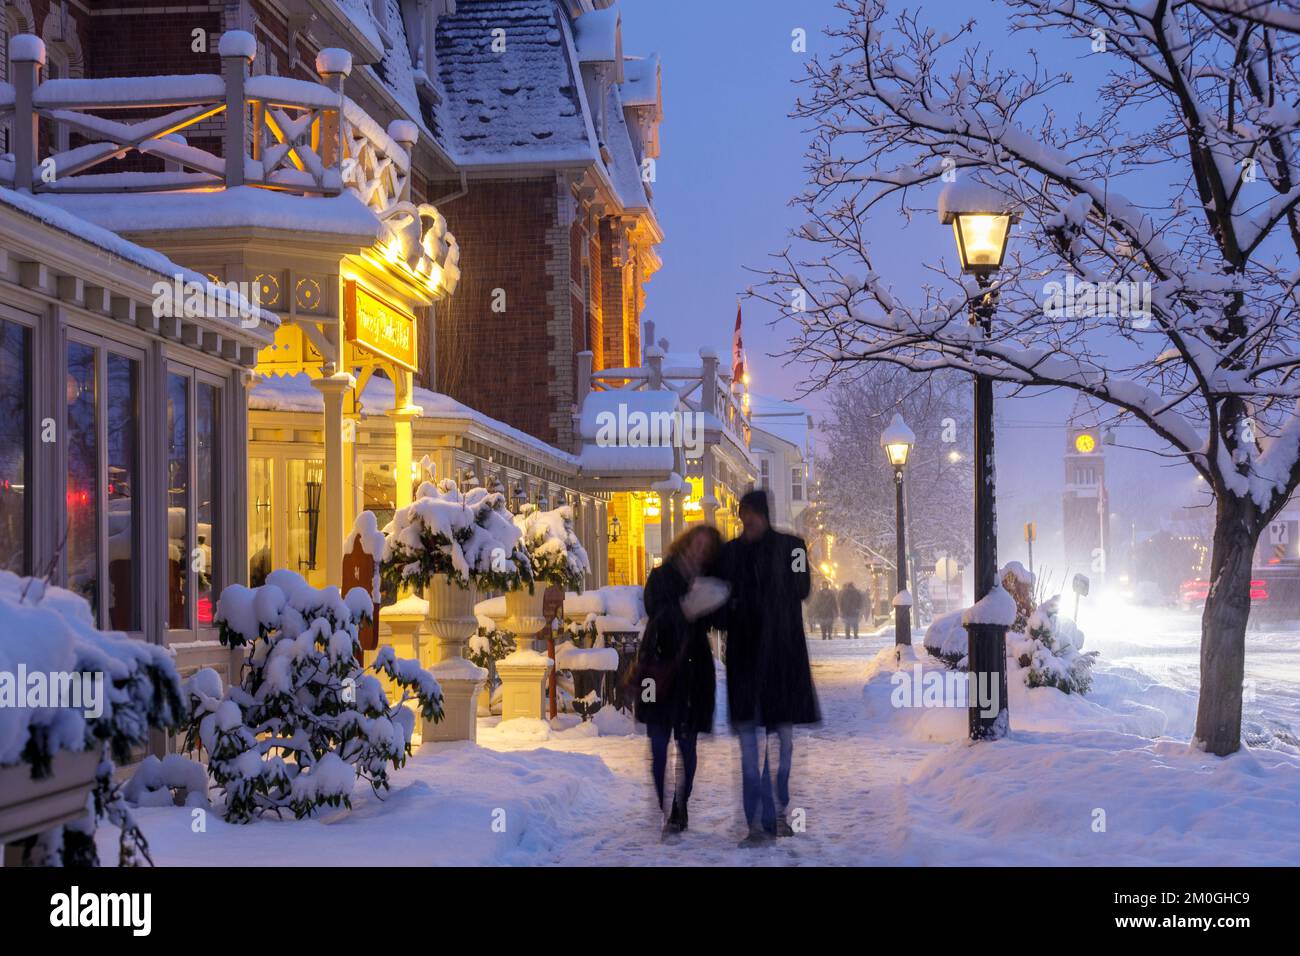 Canada, Ontario, Niagara-on-the-Lake, winter scene on Queen Street and the Prince of Wales Hotel on a snowy evening Stock Photo